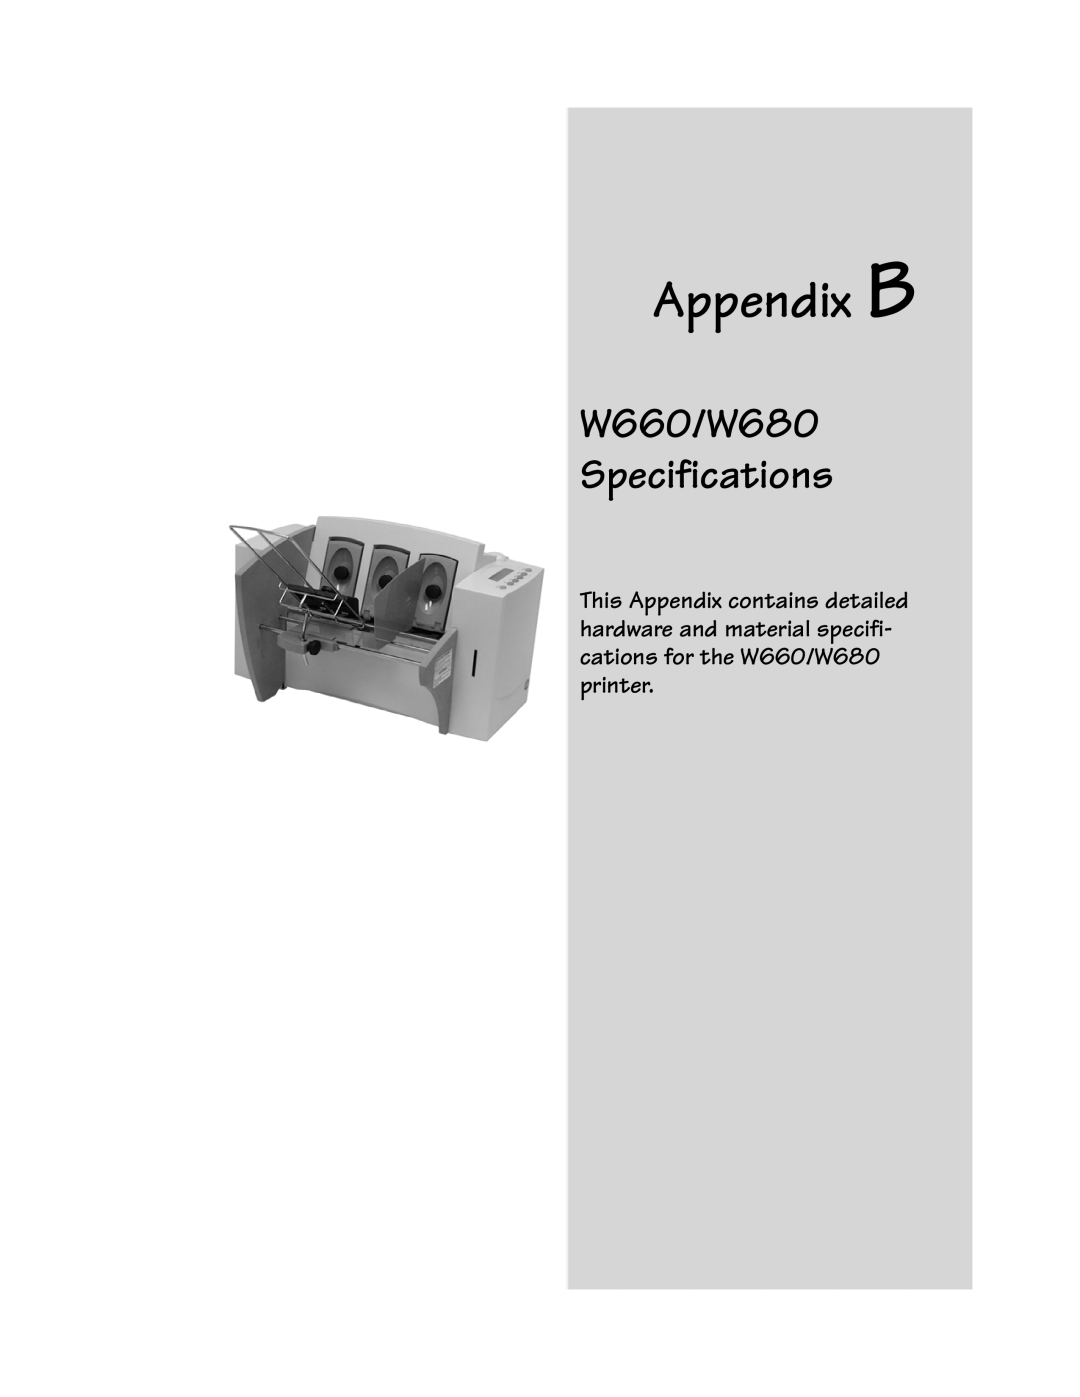 Pitney Bowes manual Appendix B, W660/W680 Specifications 